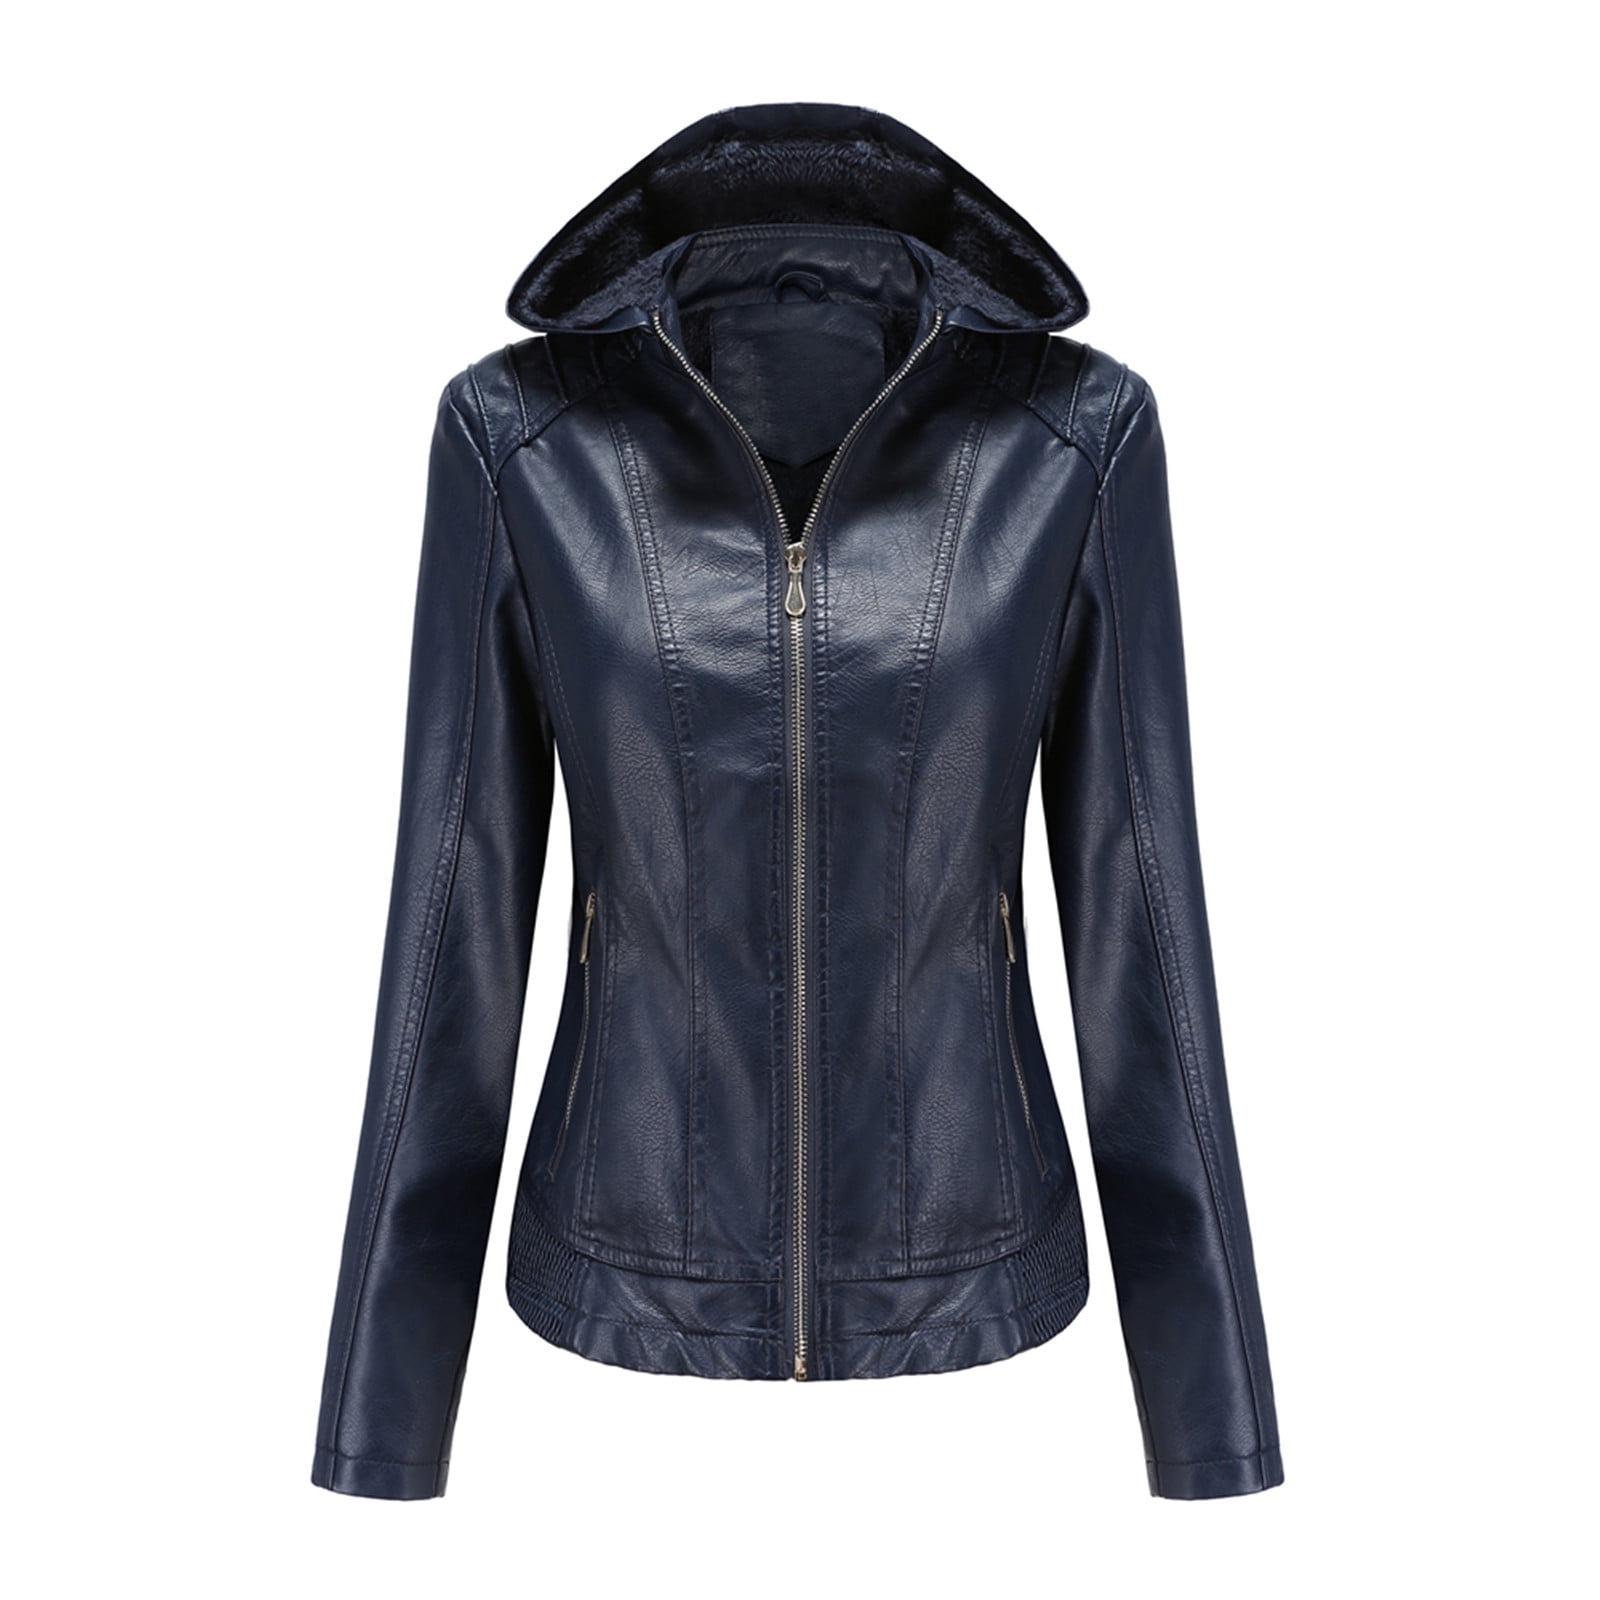 June Womens Solid Zip Up Jackets PU Leather Hooded Coats Plus Size 